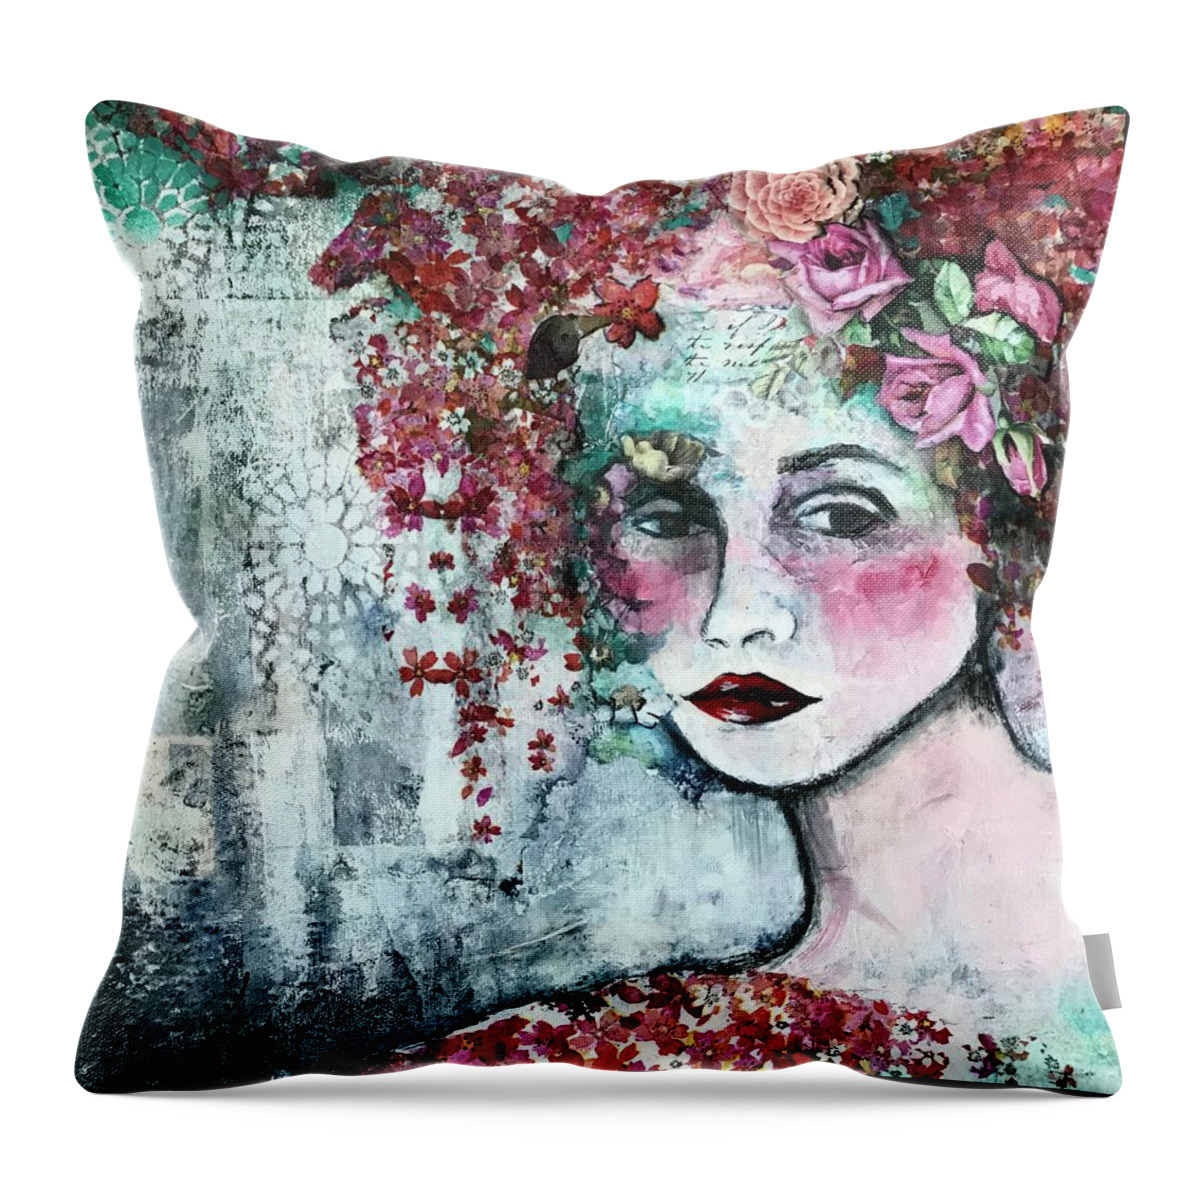 Woman Portrait Throw Pillow featuring the painting Vintage Woman by Diane Fujimoto